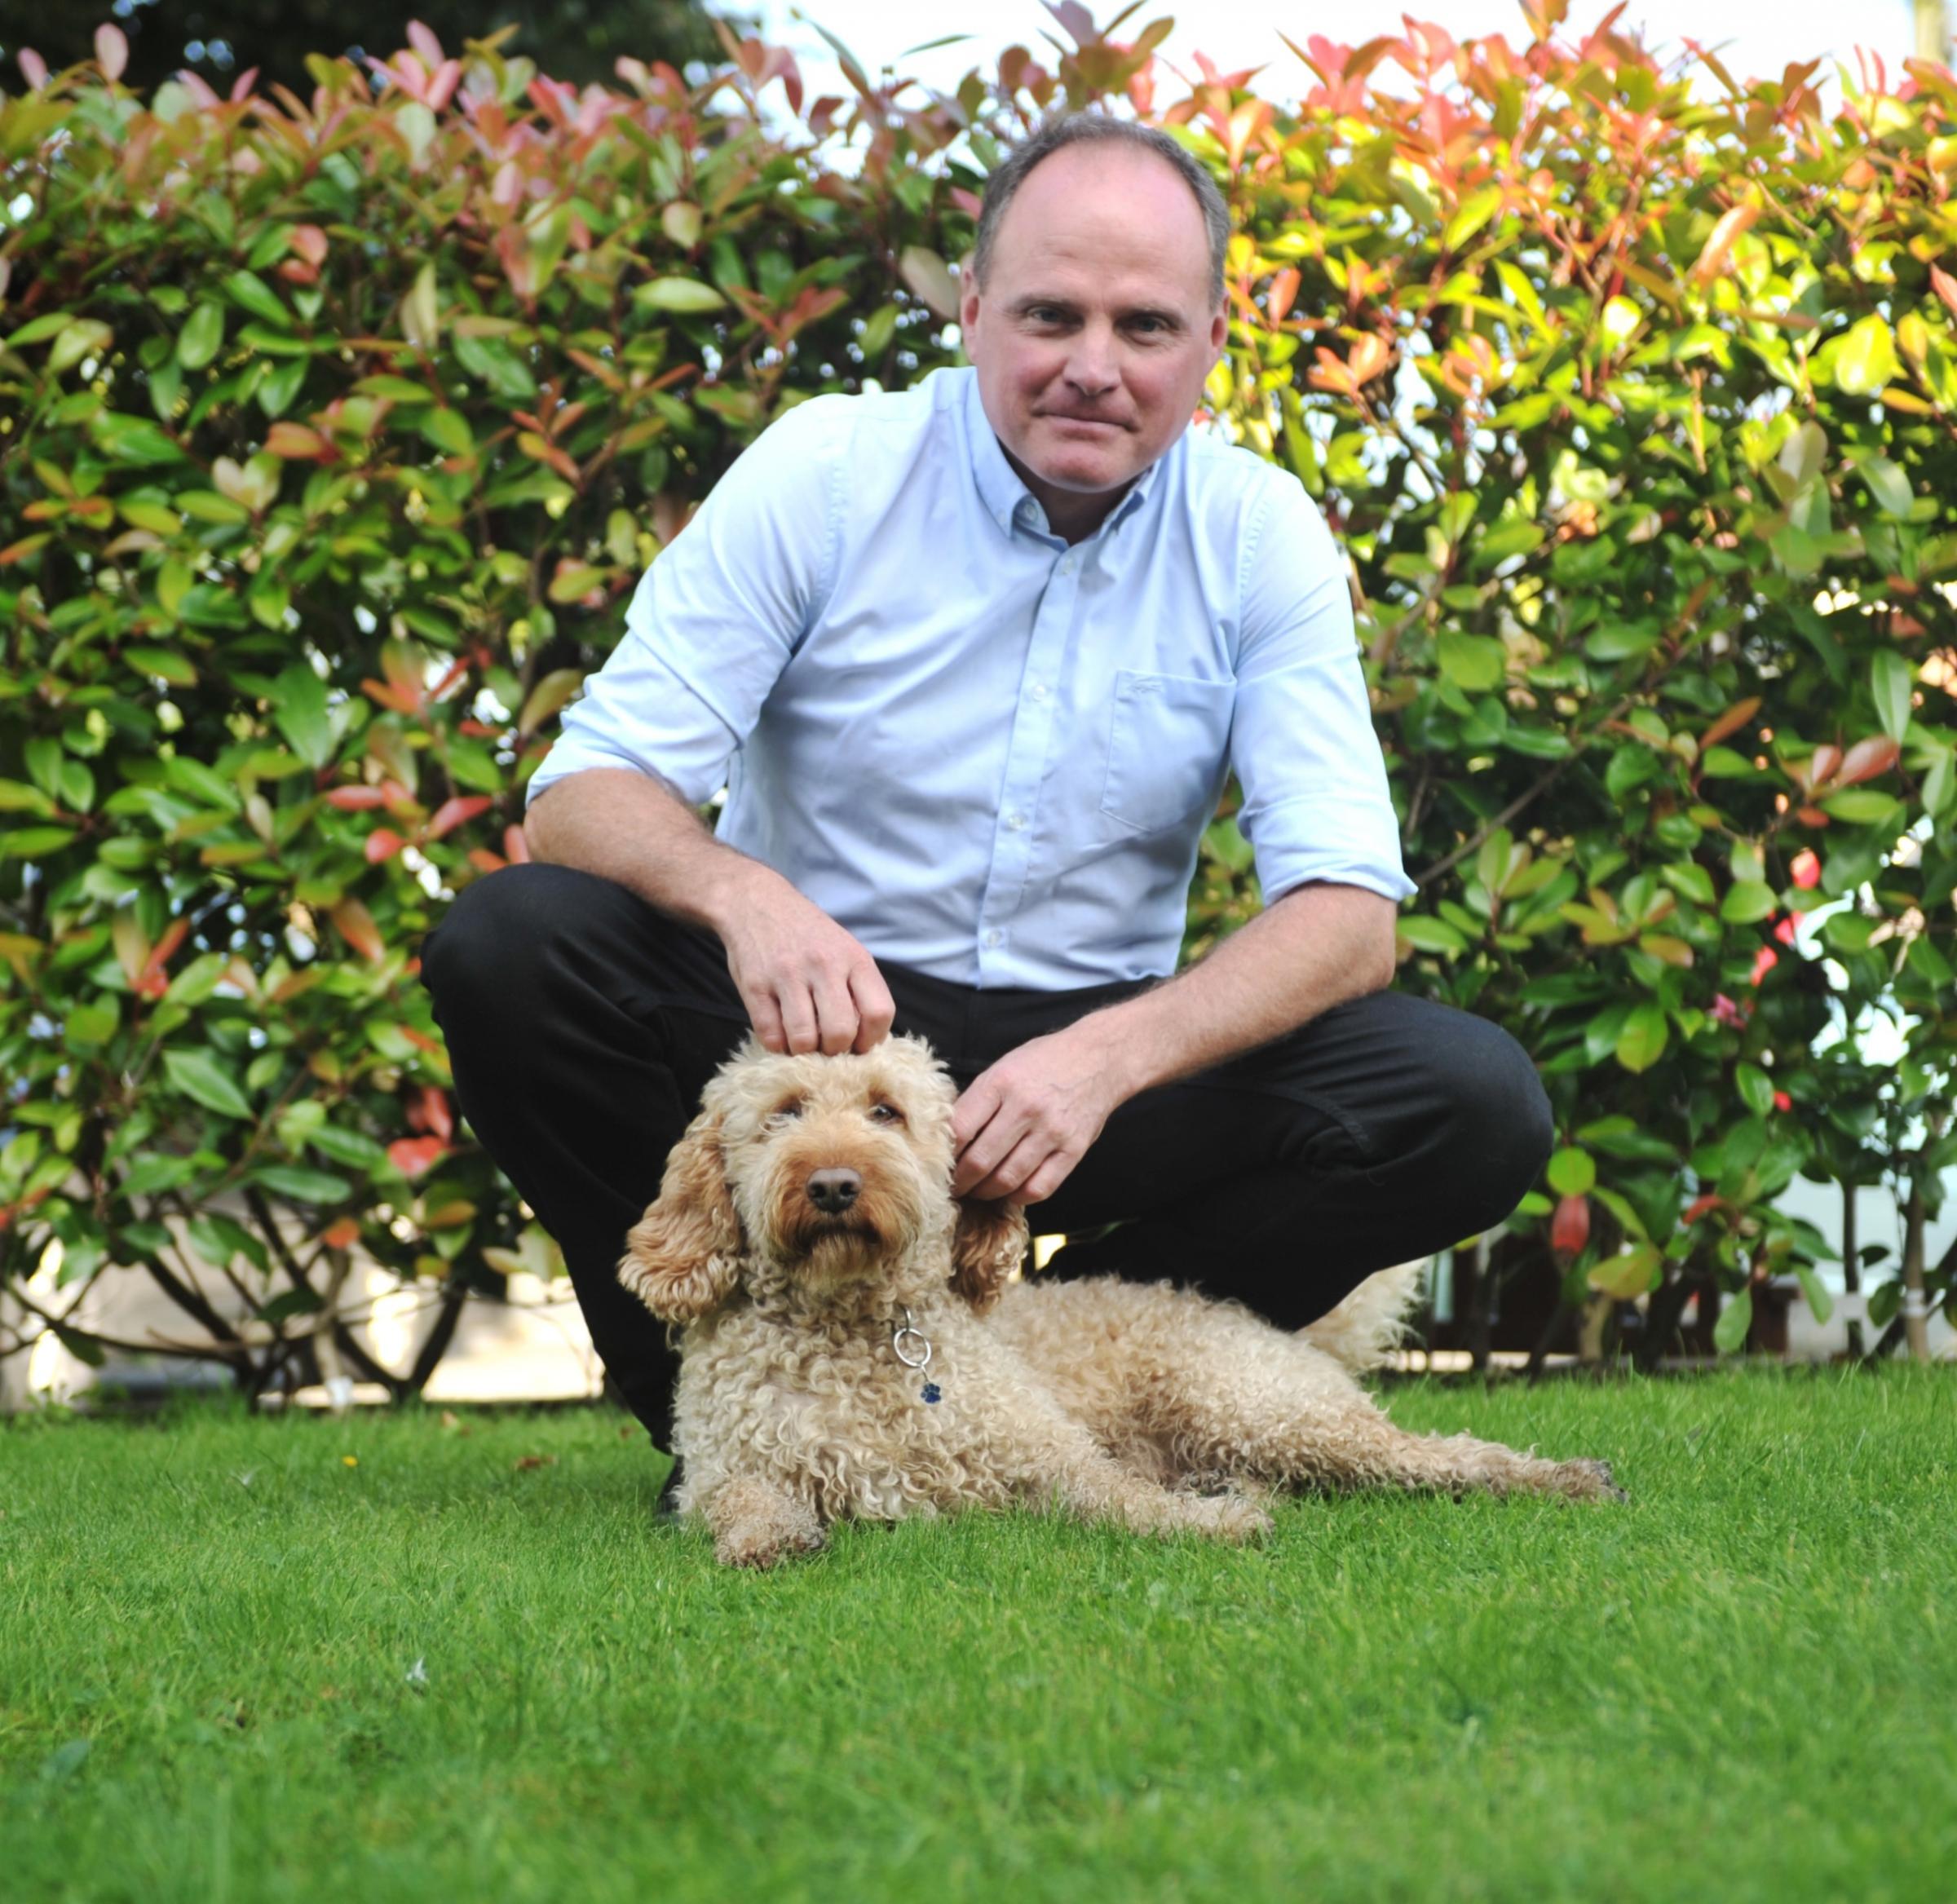 Dr Sean Cleary, of Burford Lane Vets in Lymm